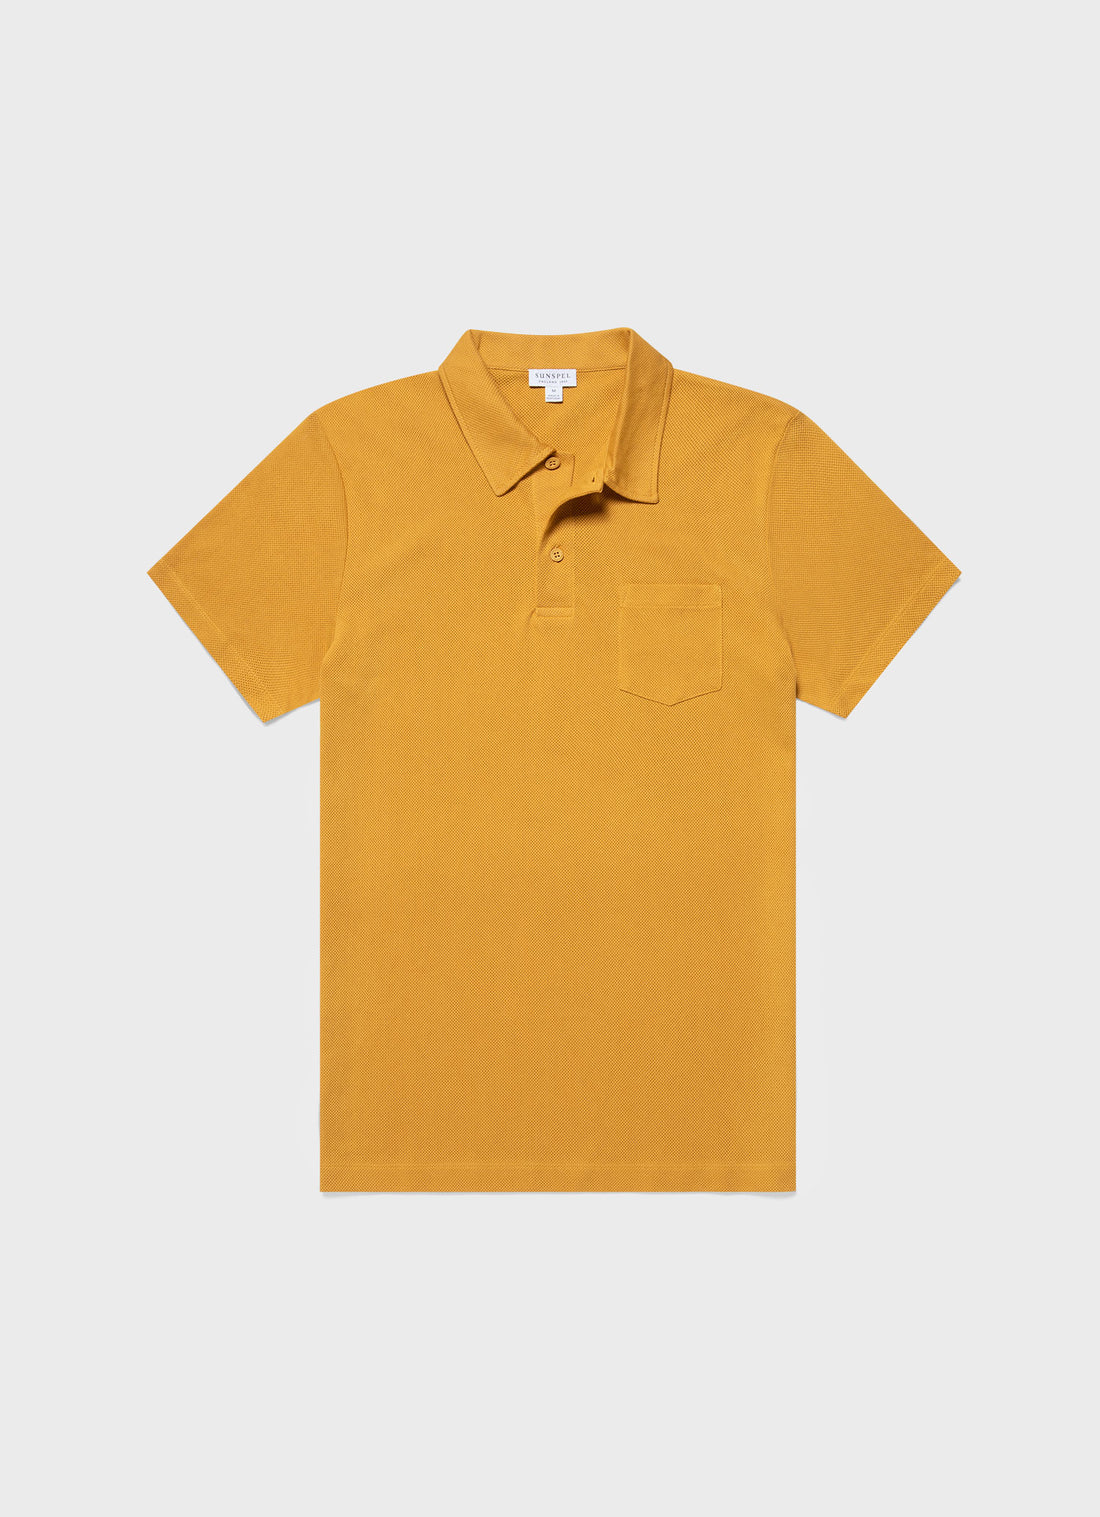 Men's Riviera Polo Shirt in Cider